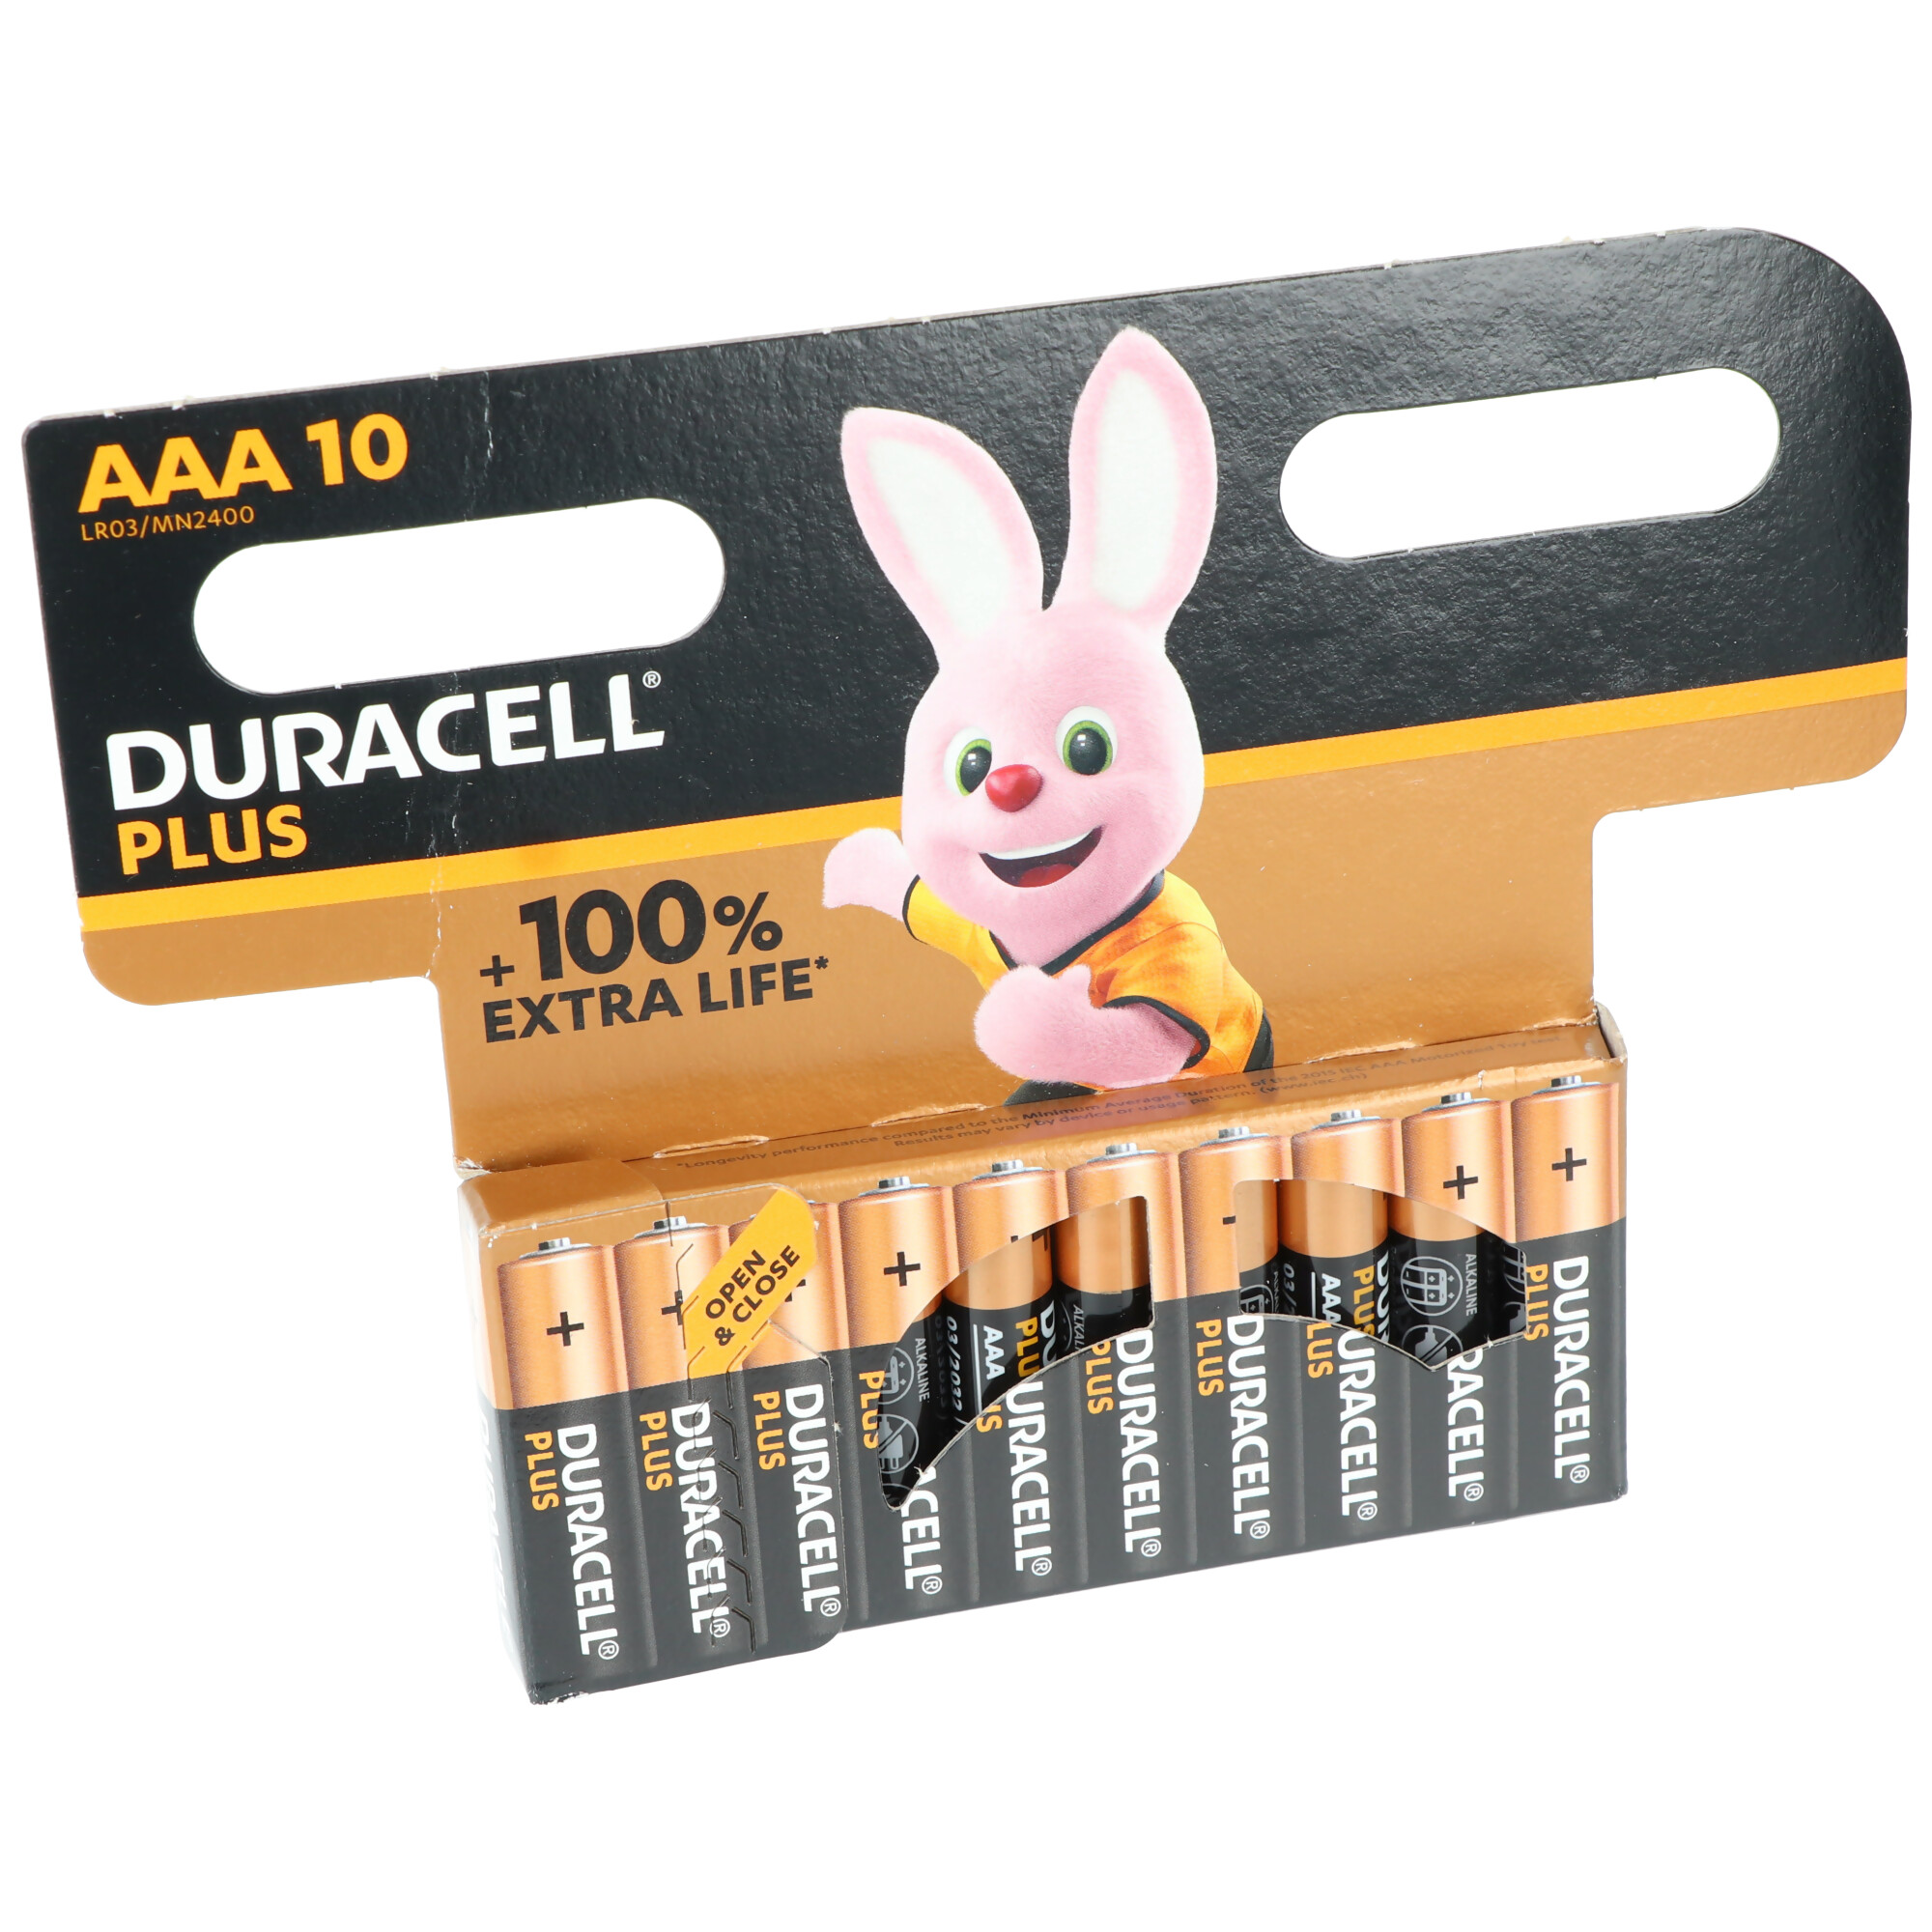 Duracell Batterie Alkaline, Micro, AAA, LR03, 1.5V Plus, Extra Life, Retail Blister (10-Pack)